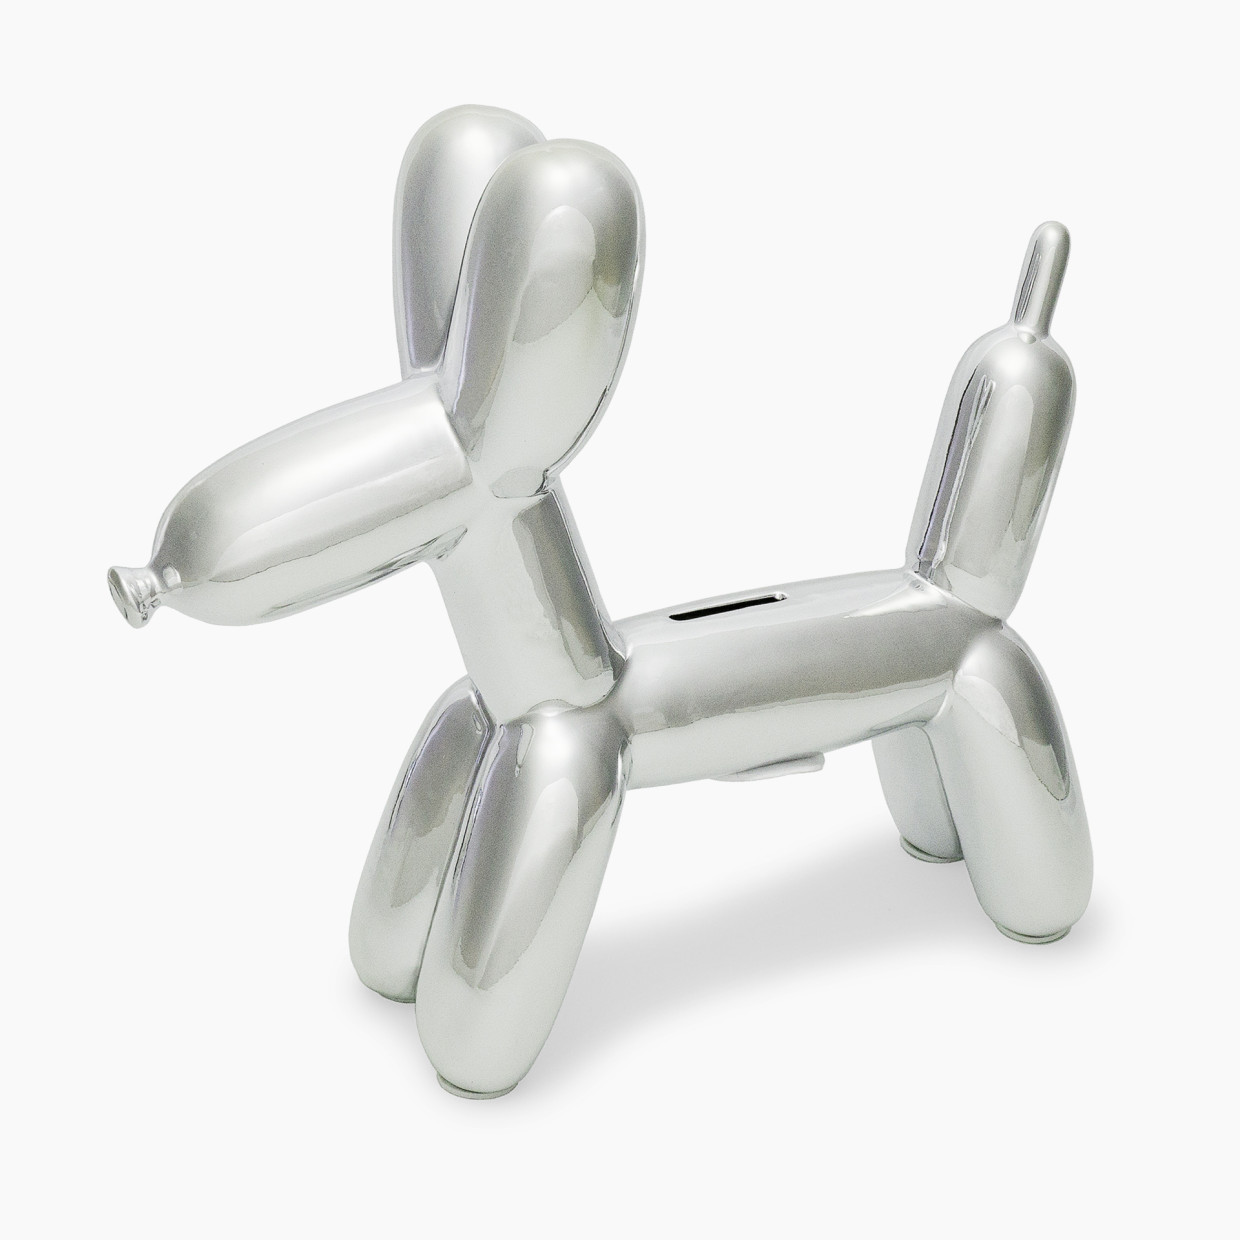 Made by Humans 2 Balloon Money Bank - Silver Dog.